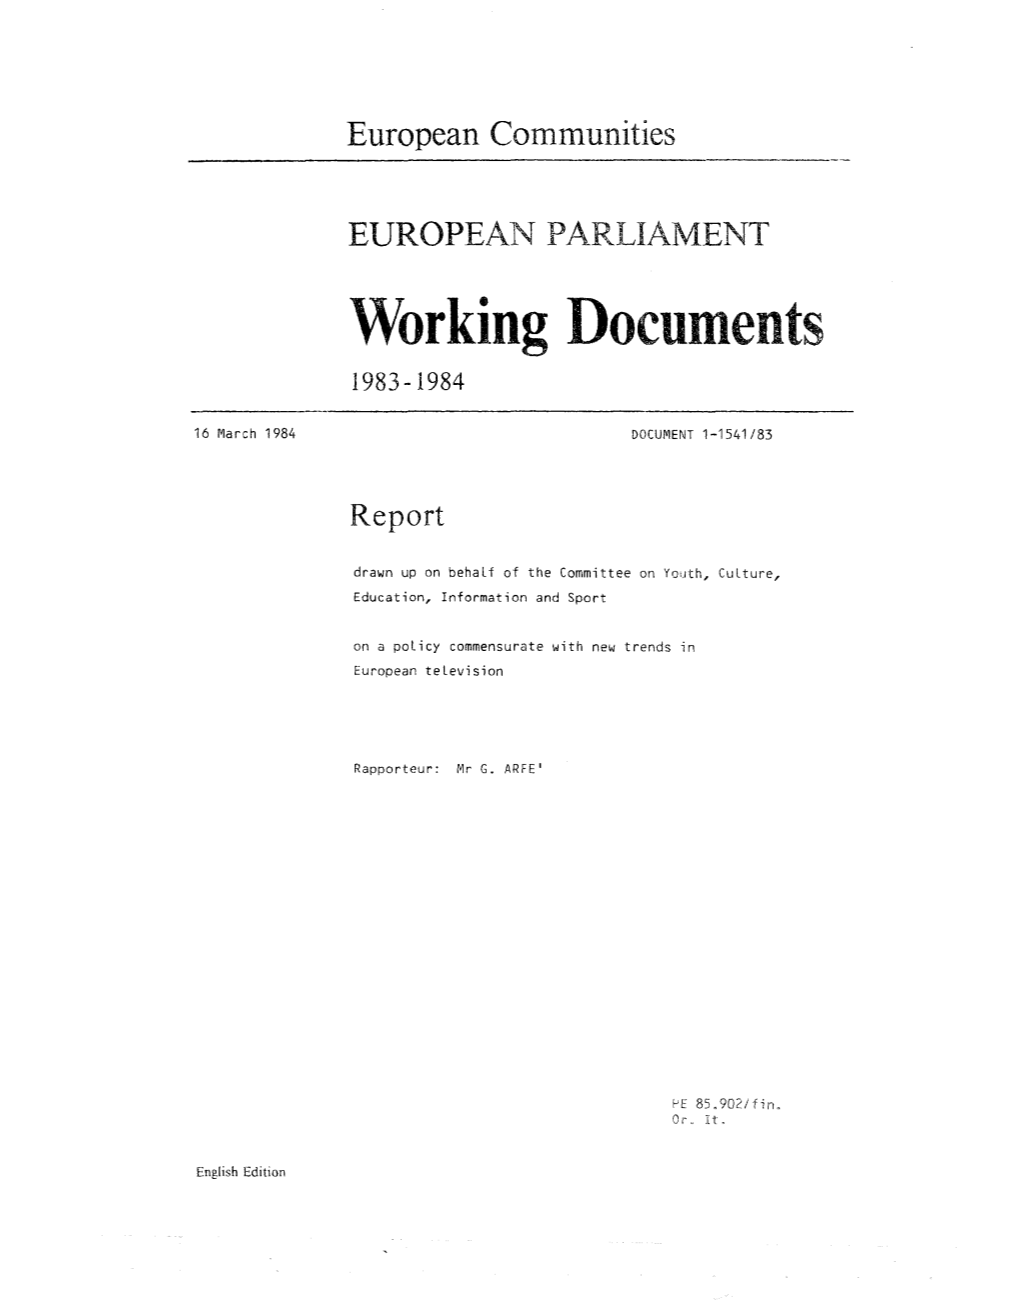 Working Documents 1983-1984